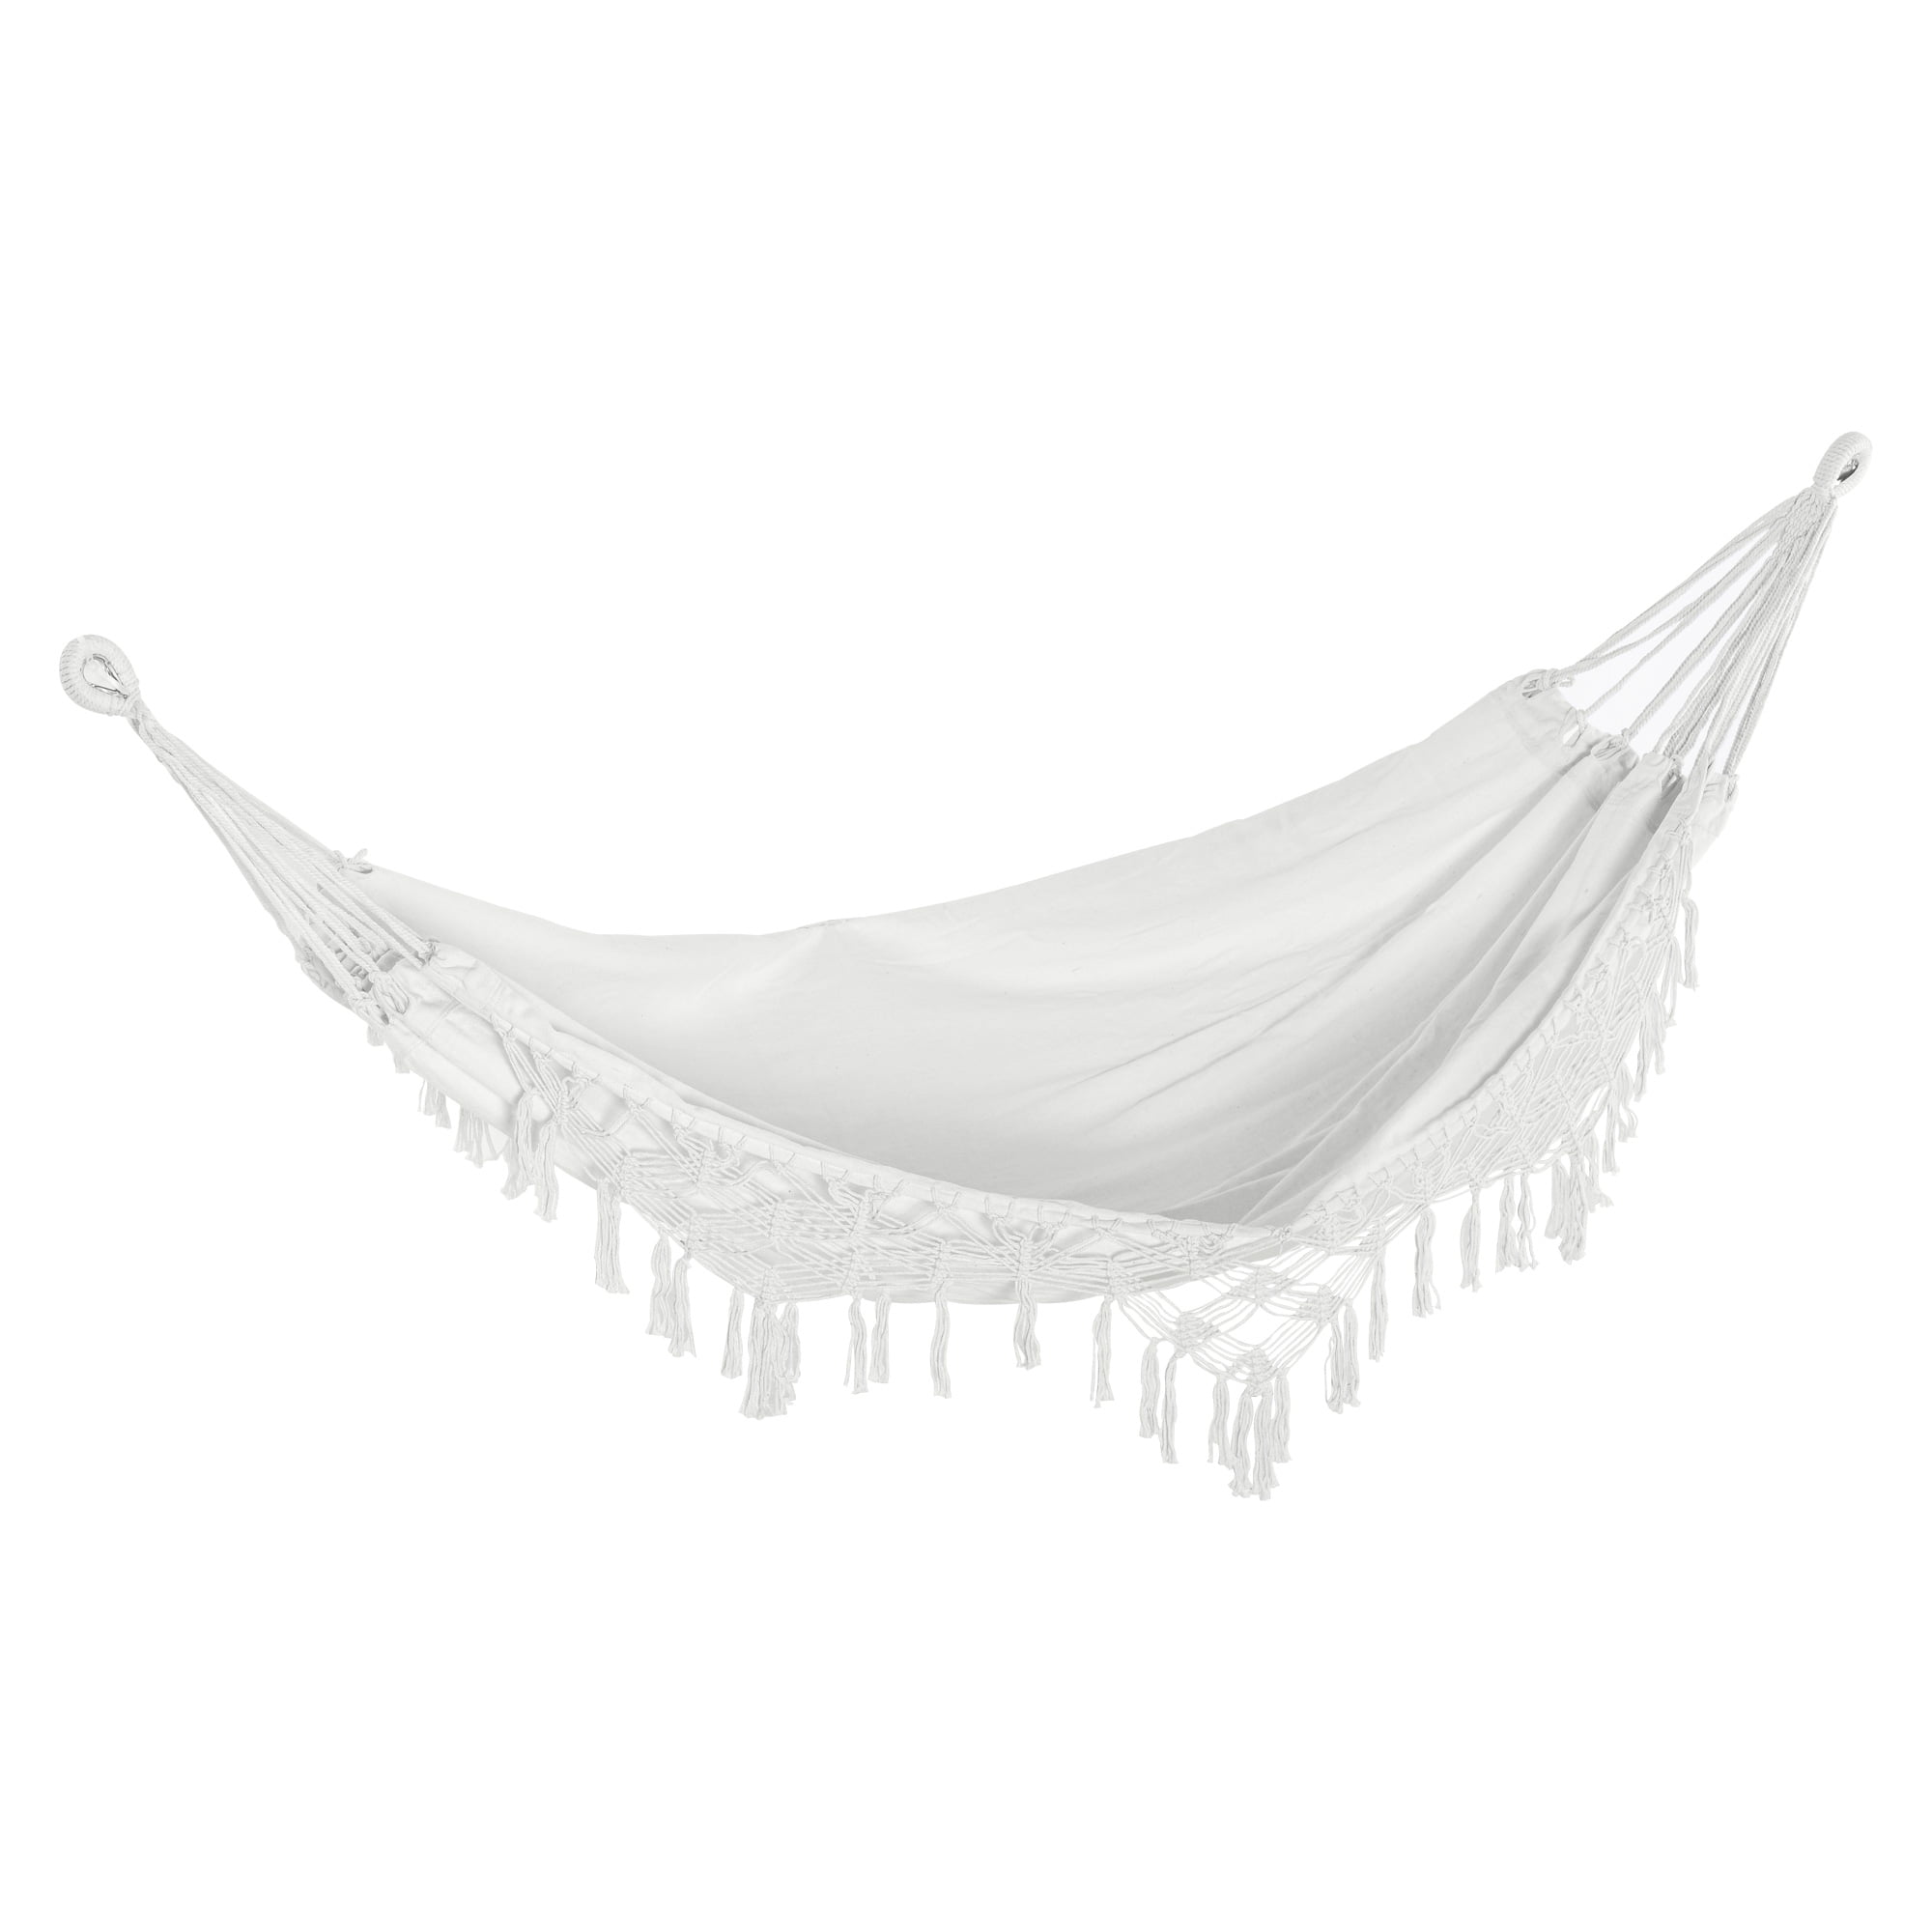 Sunnydaze 2-Person Quilted Printed Fabric Spreader Bar Hammock and 